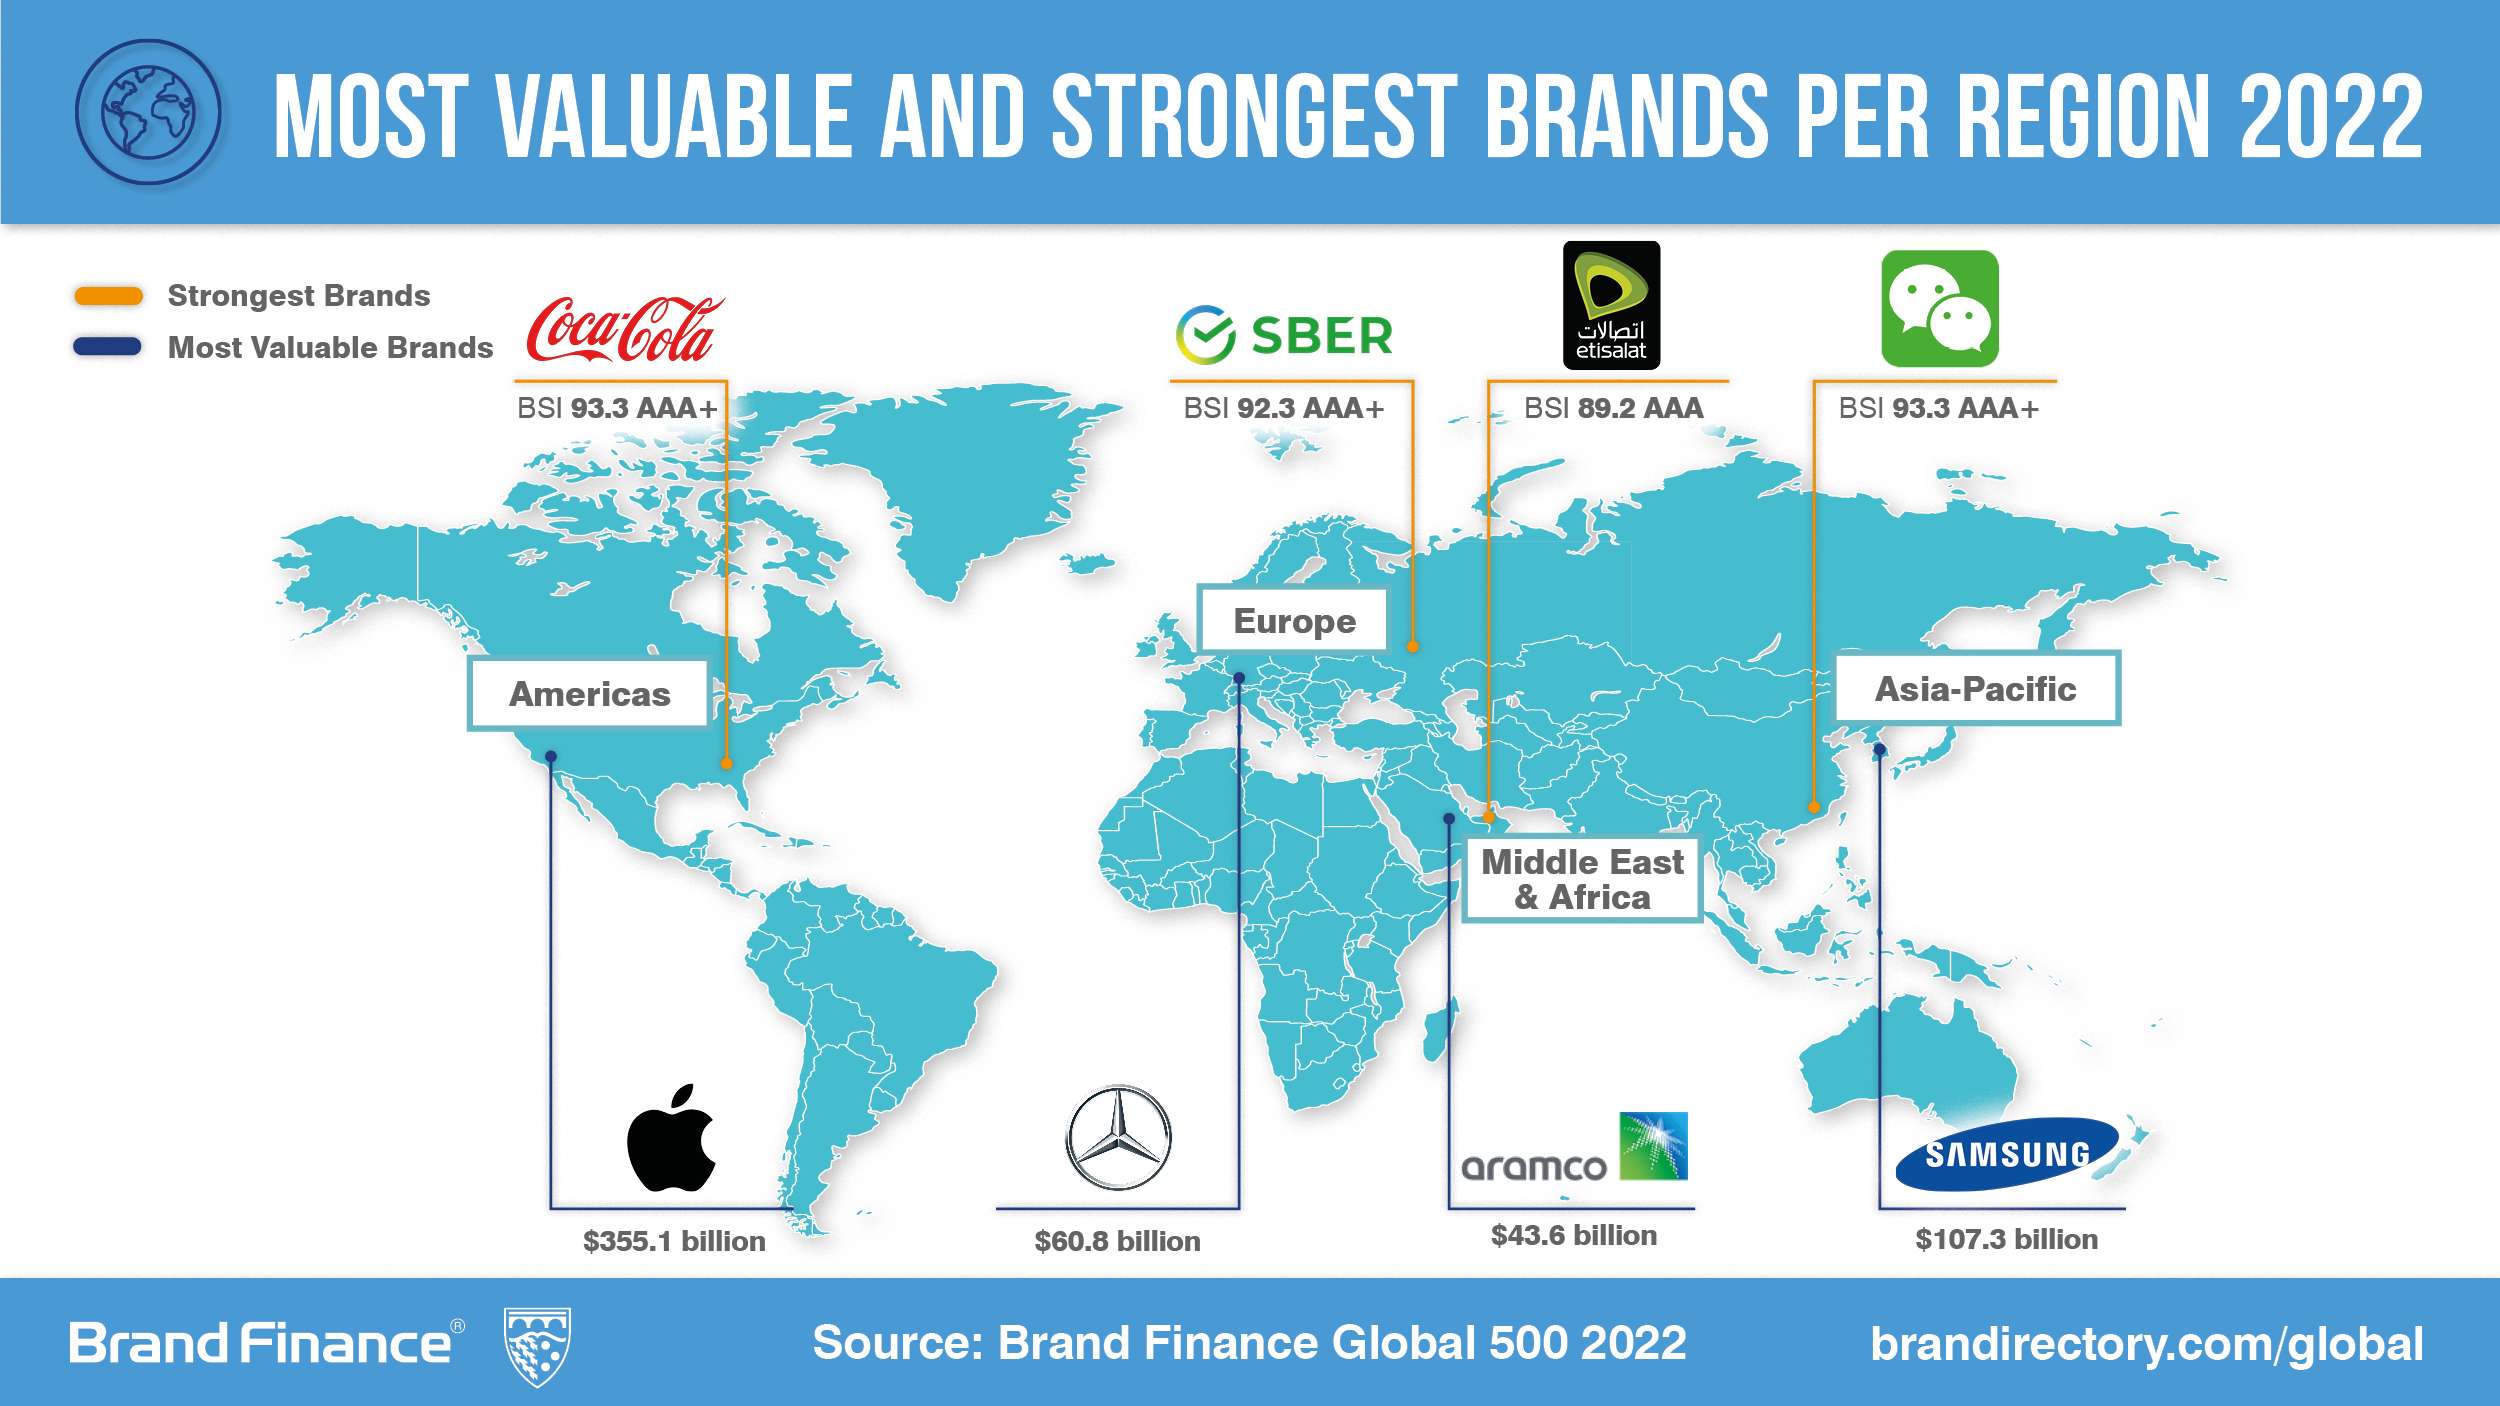 Etisalat crowned as the strongest telecom brand in the world